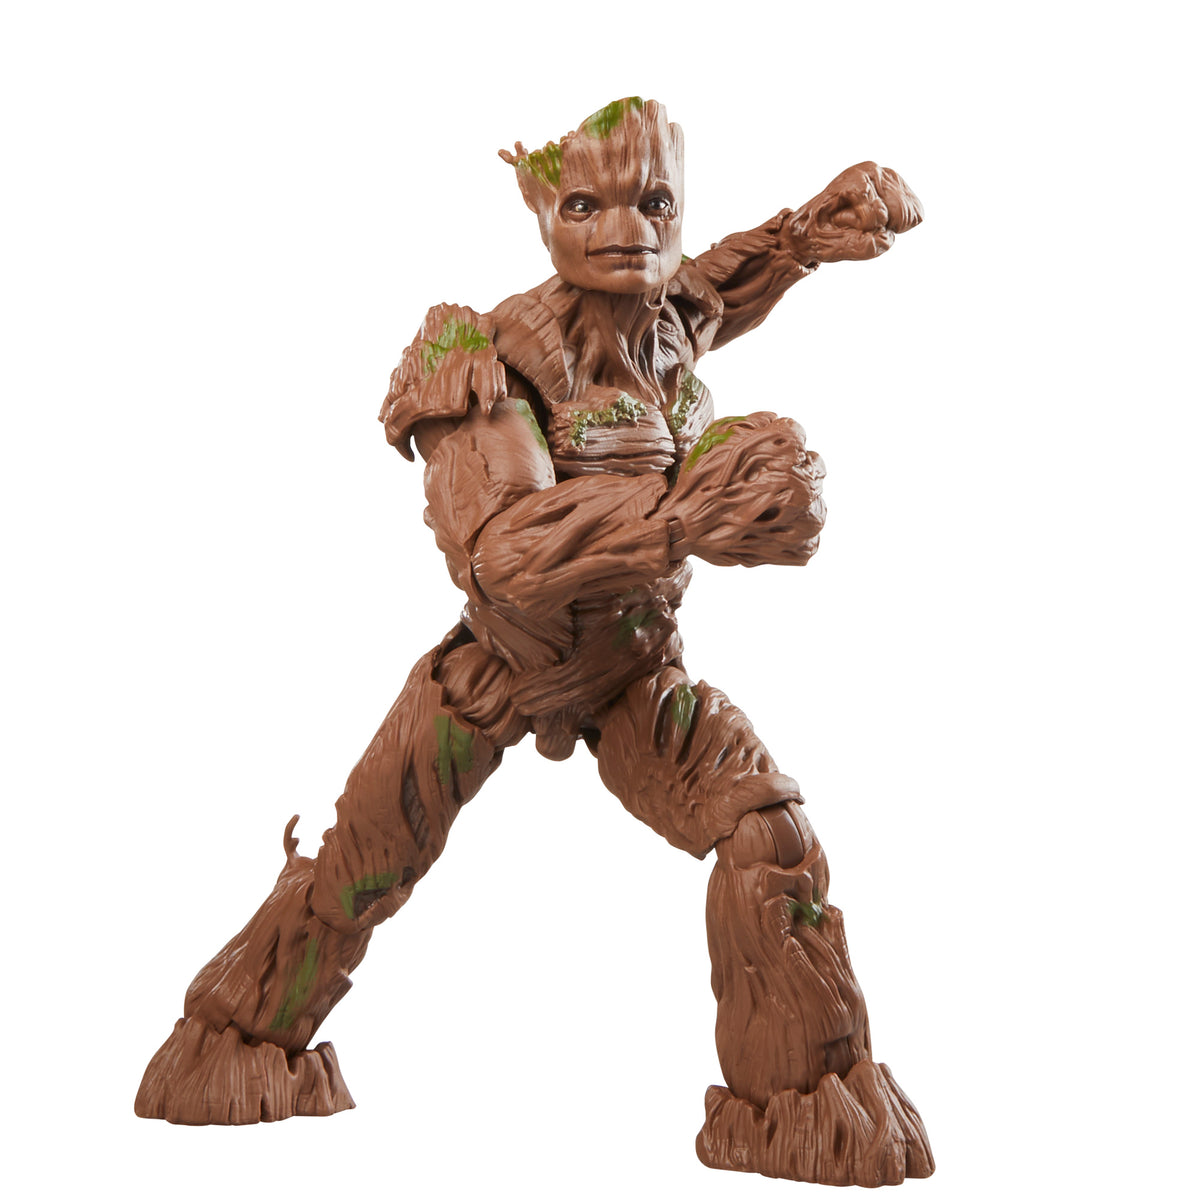 Marvel Legends Star Lord Groot Build A